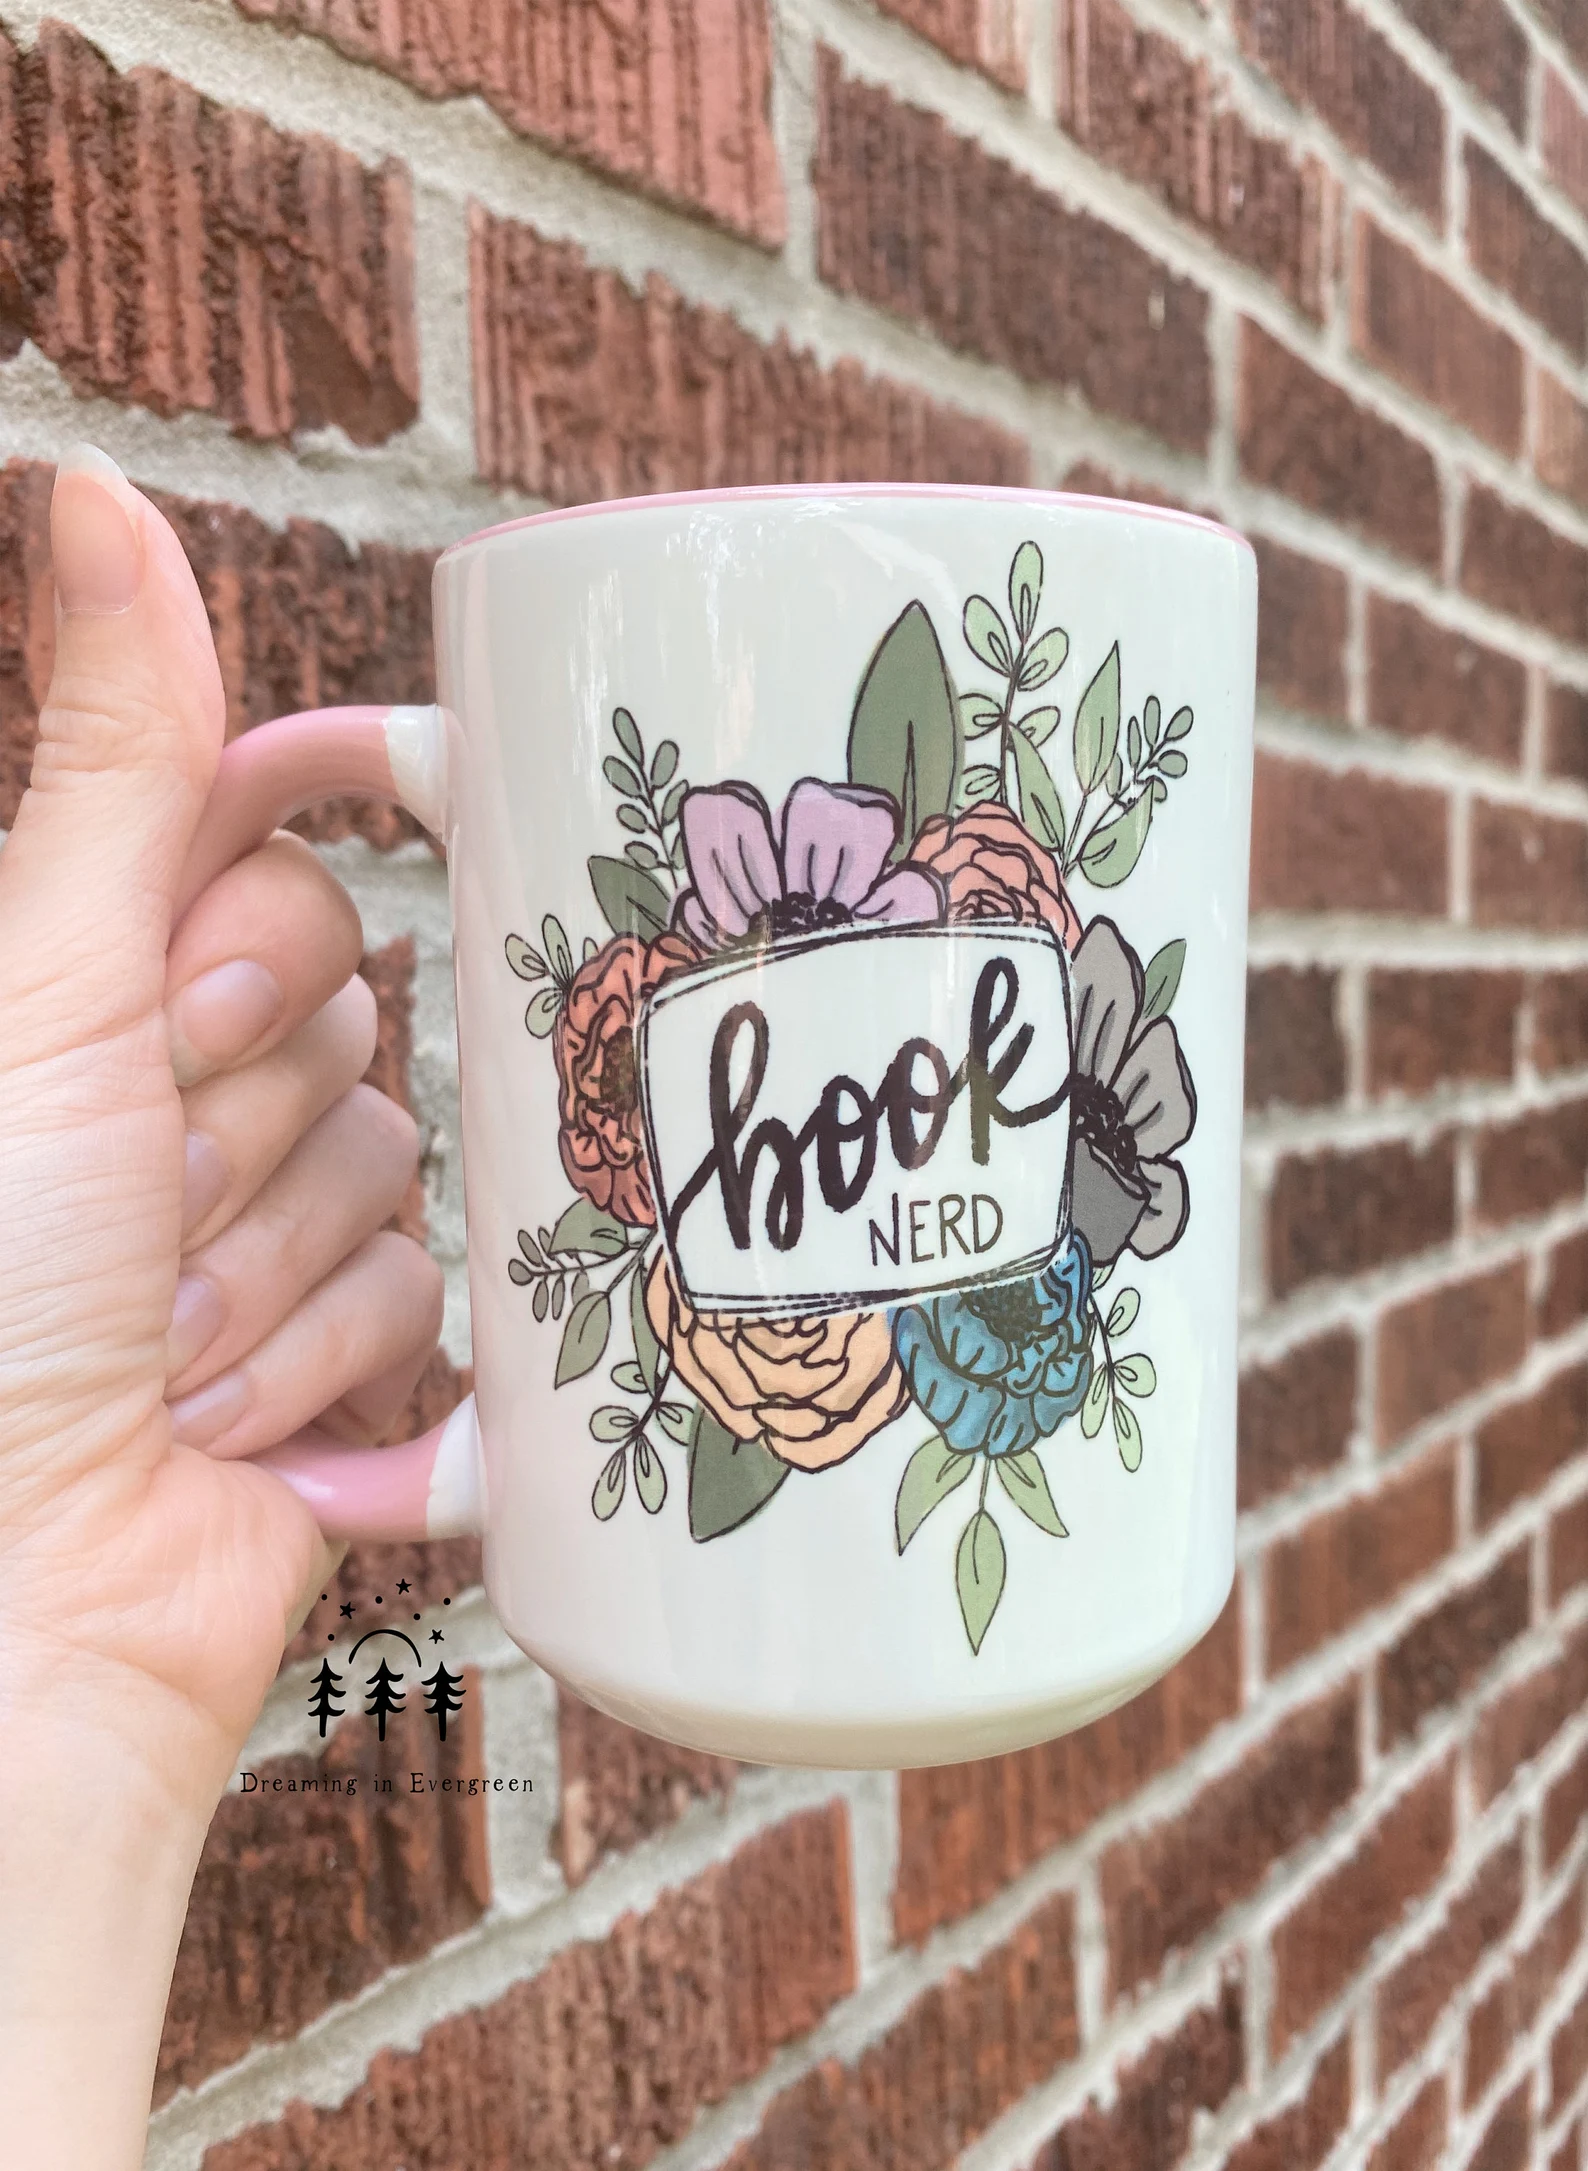 a white and pink mug with orange, pink, blue, and brown blossoms that reads "book nerd"